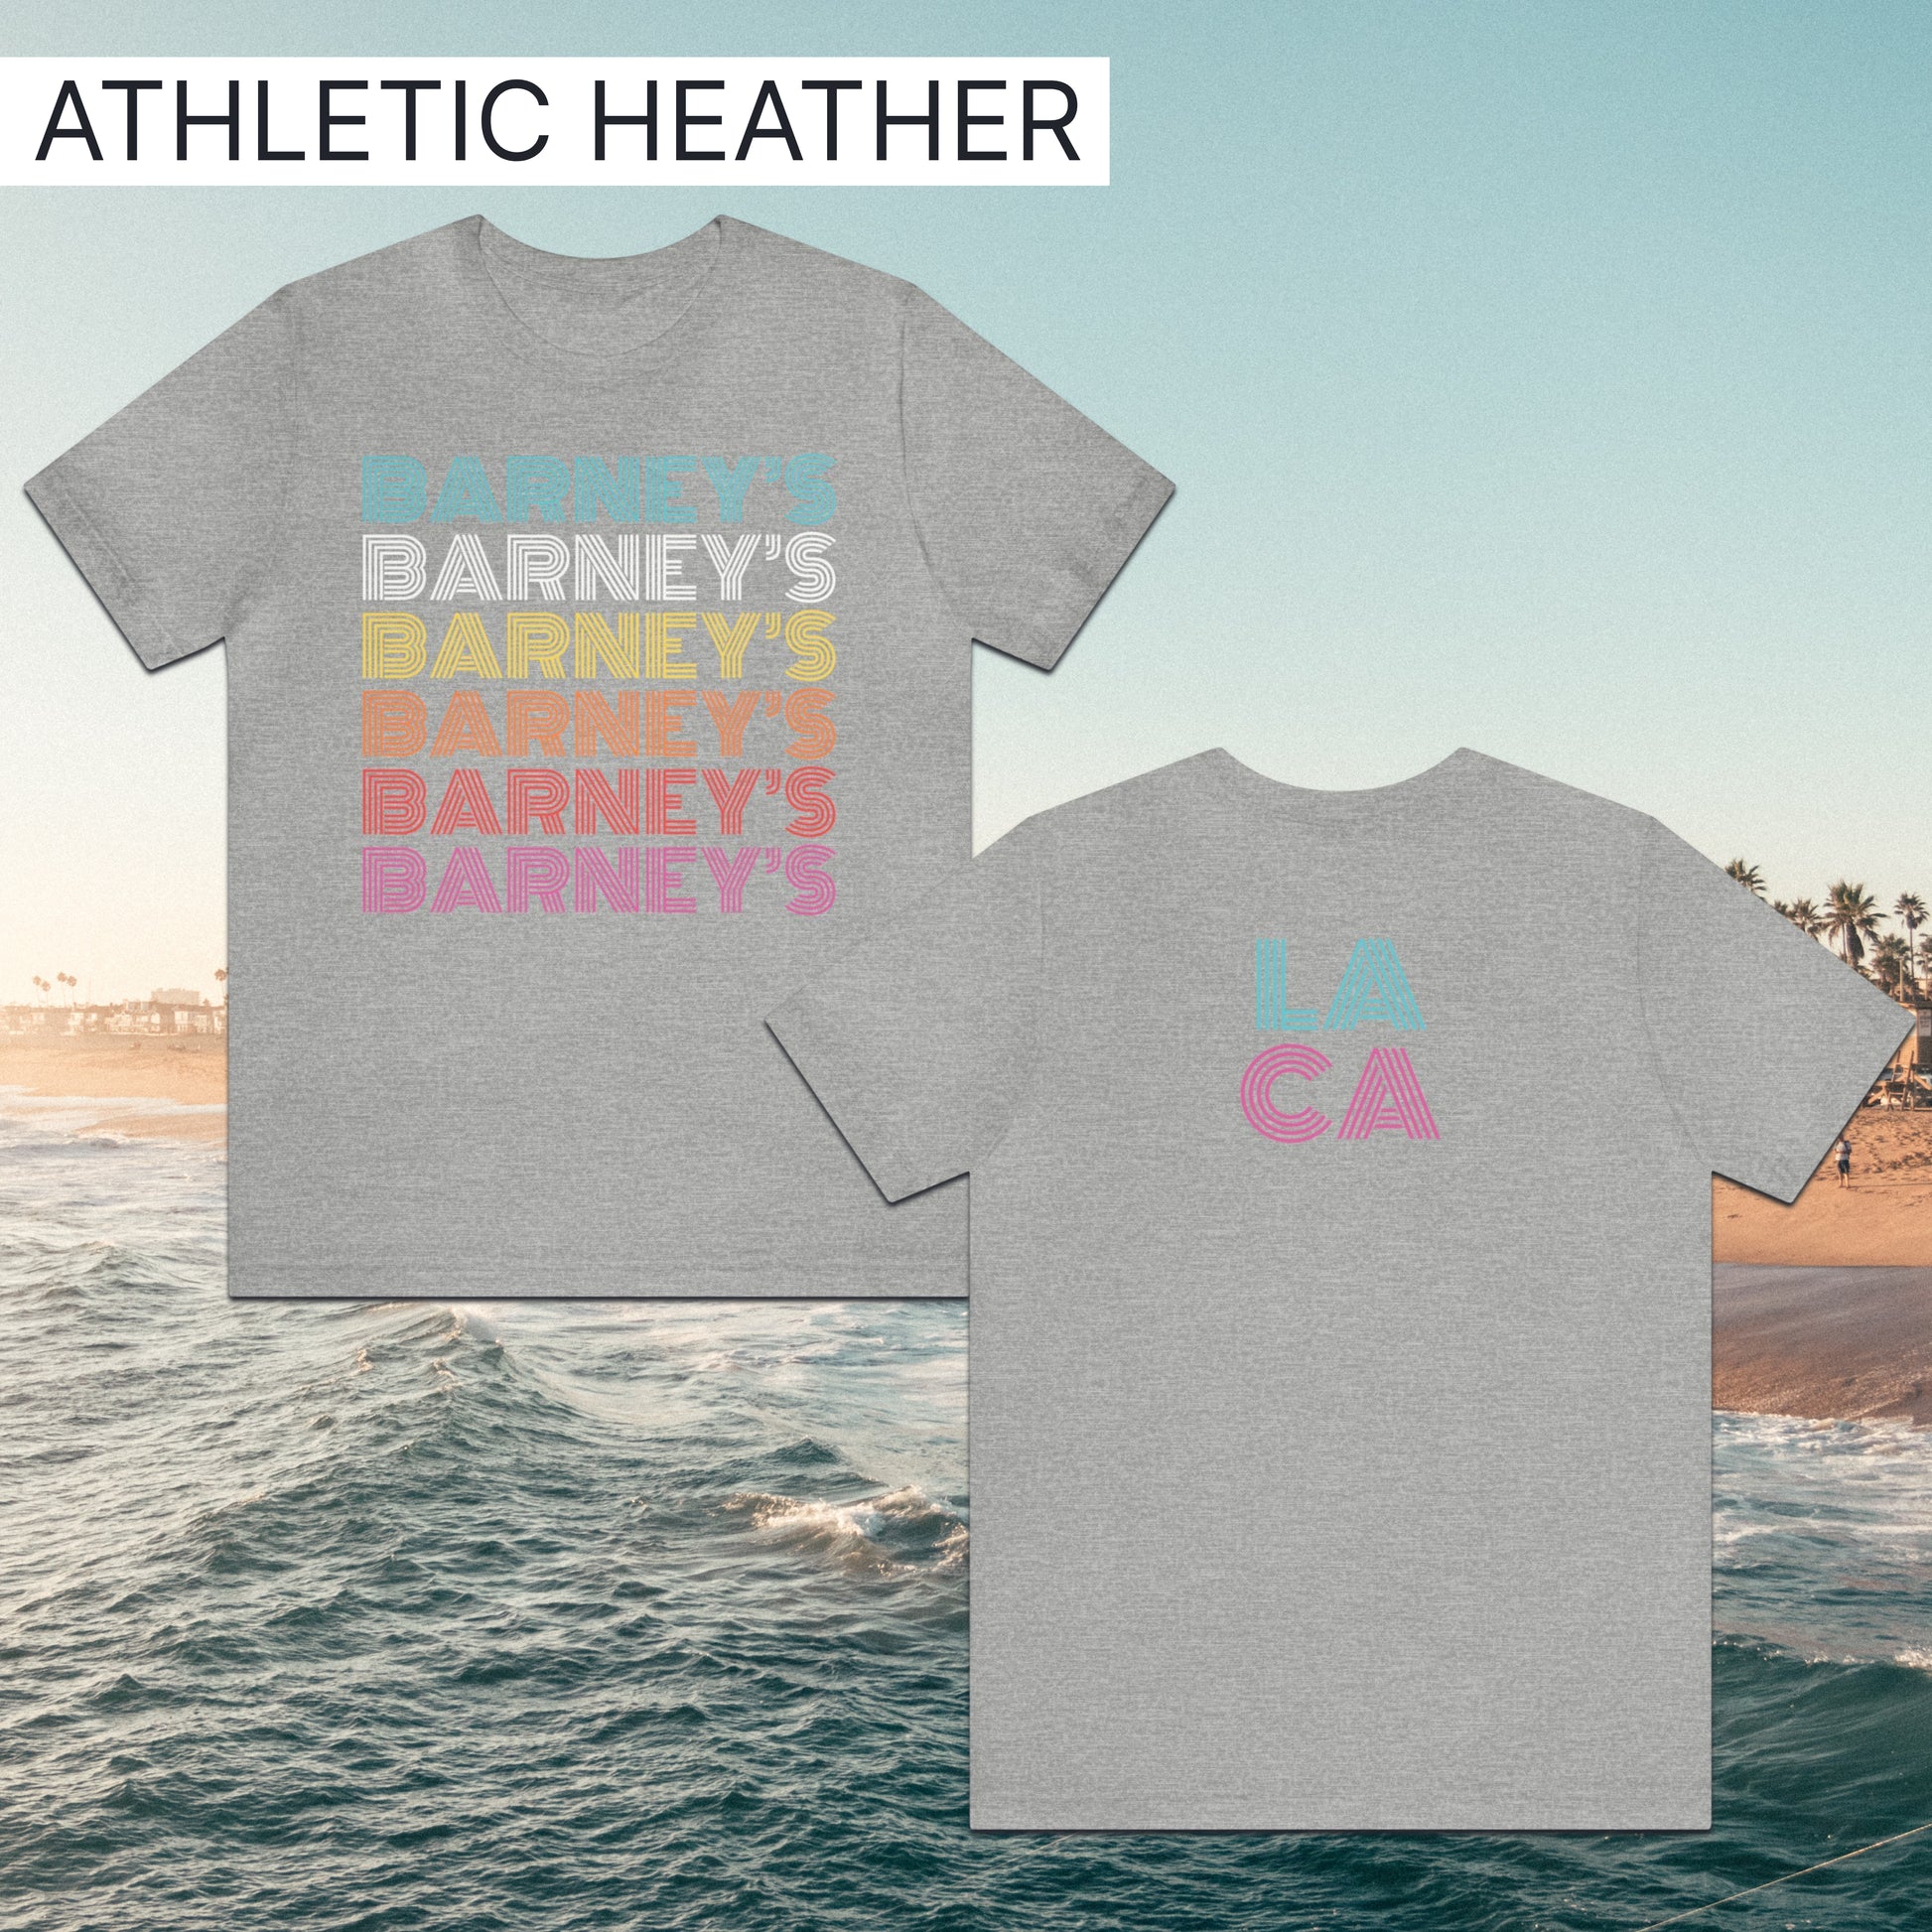 Barney's x6 Retro Hollywood | BARNEY'S BEANERY - Men's Retro Graphic Tee | Athletic Heather Bella+Canvas 3001 T-Shirt - Front And Back Flat Lay View